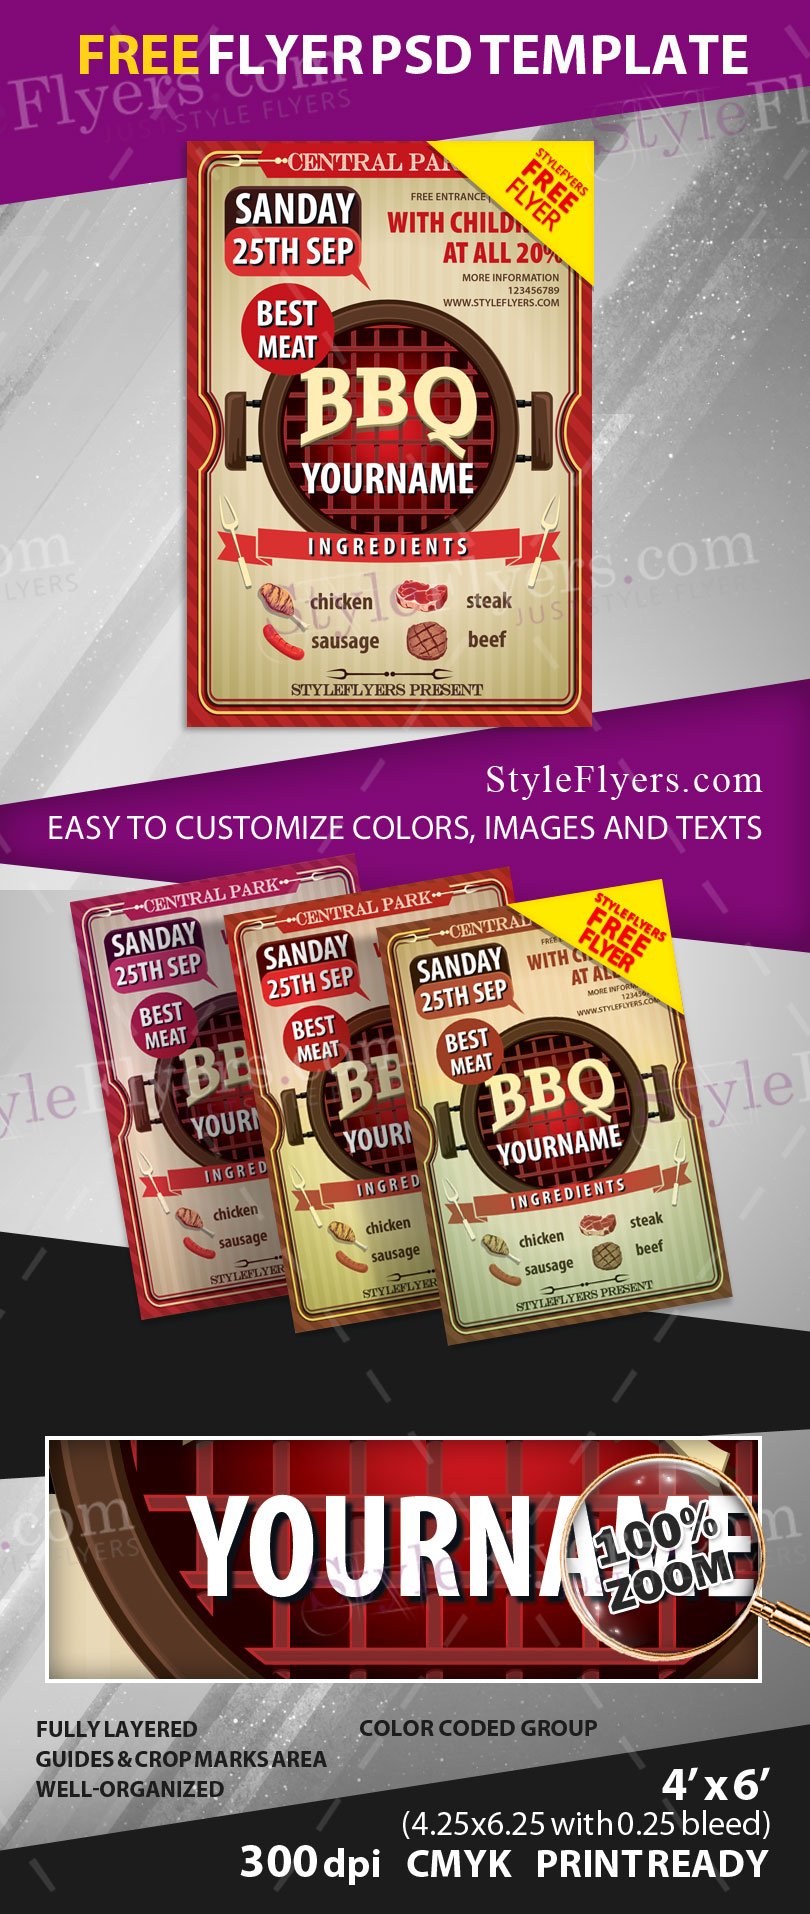 BBQ FREE PSD Flyer Template Free Download 11289 Styleflyers